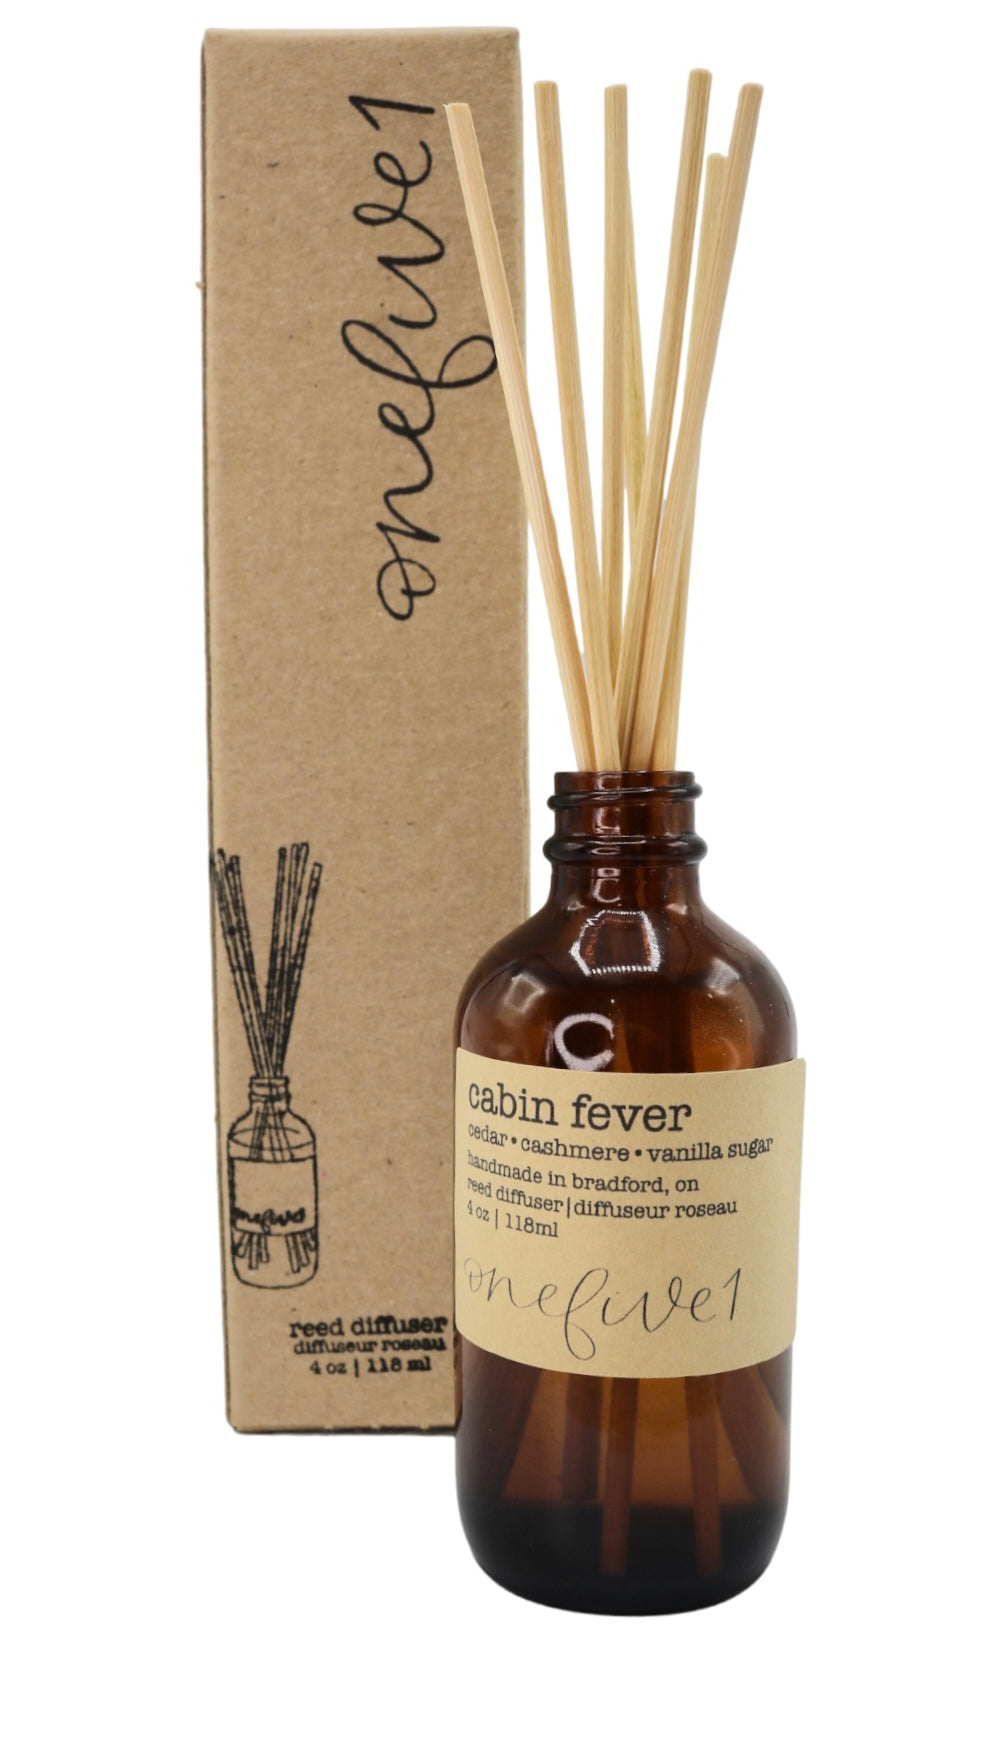 cabin fever reed diffuser